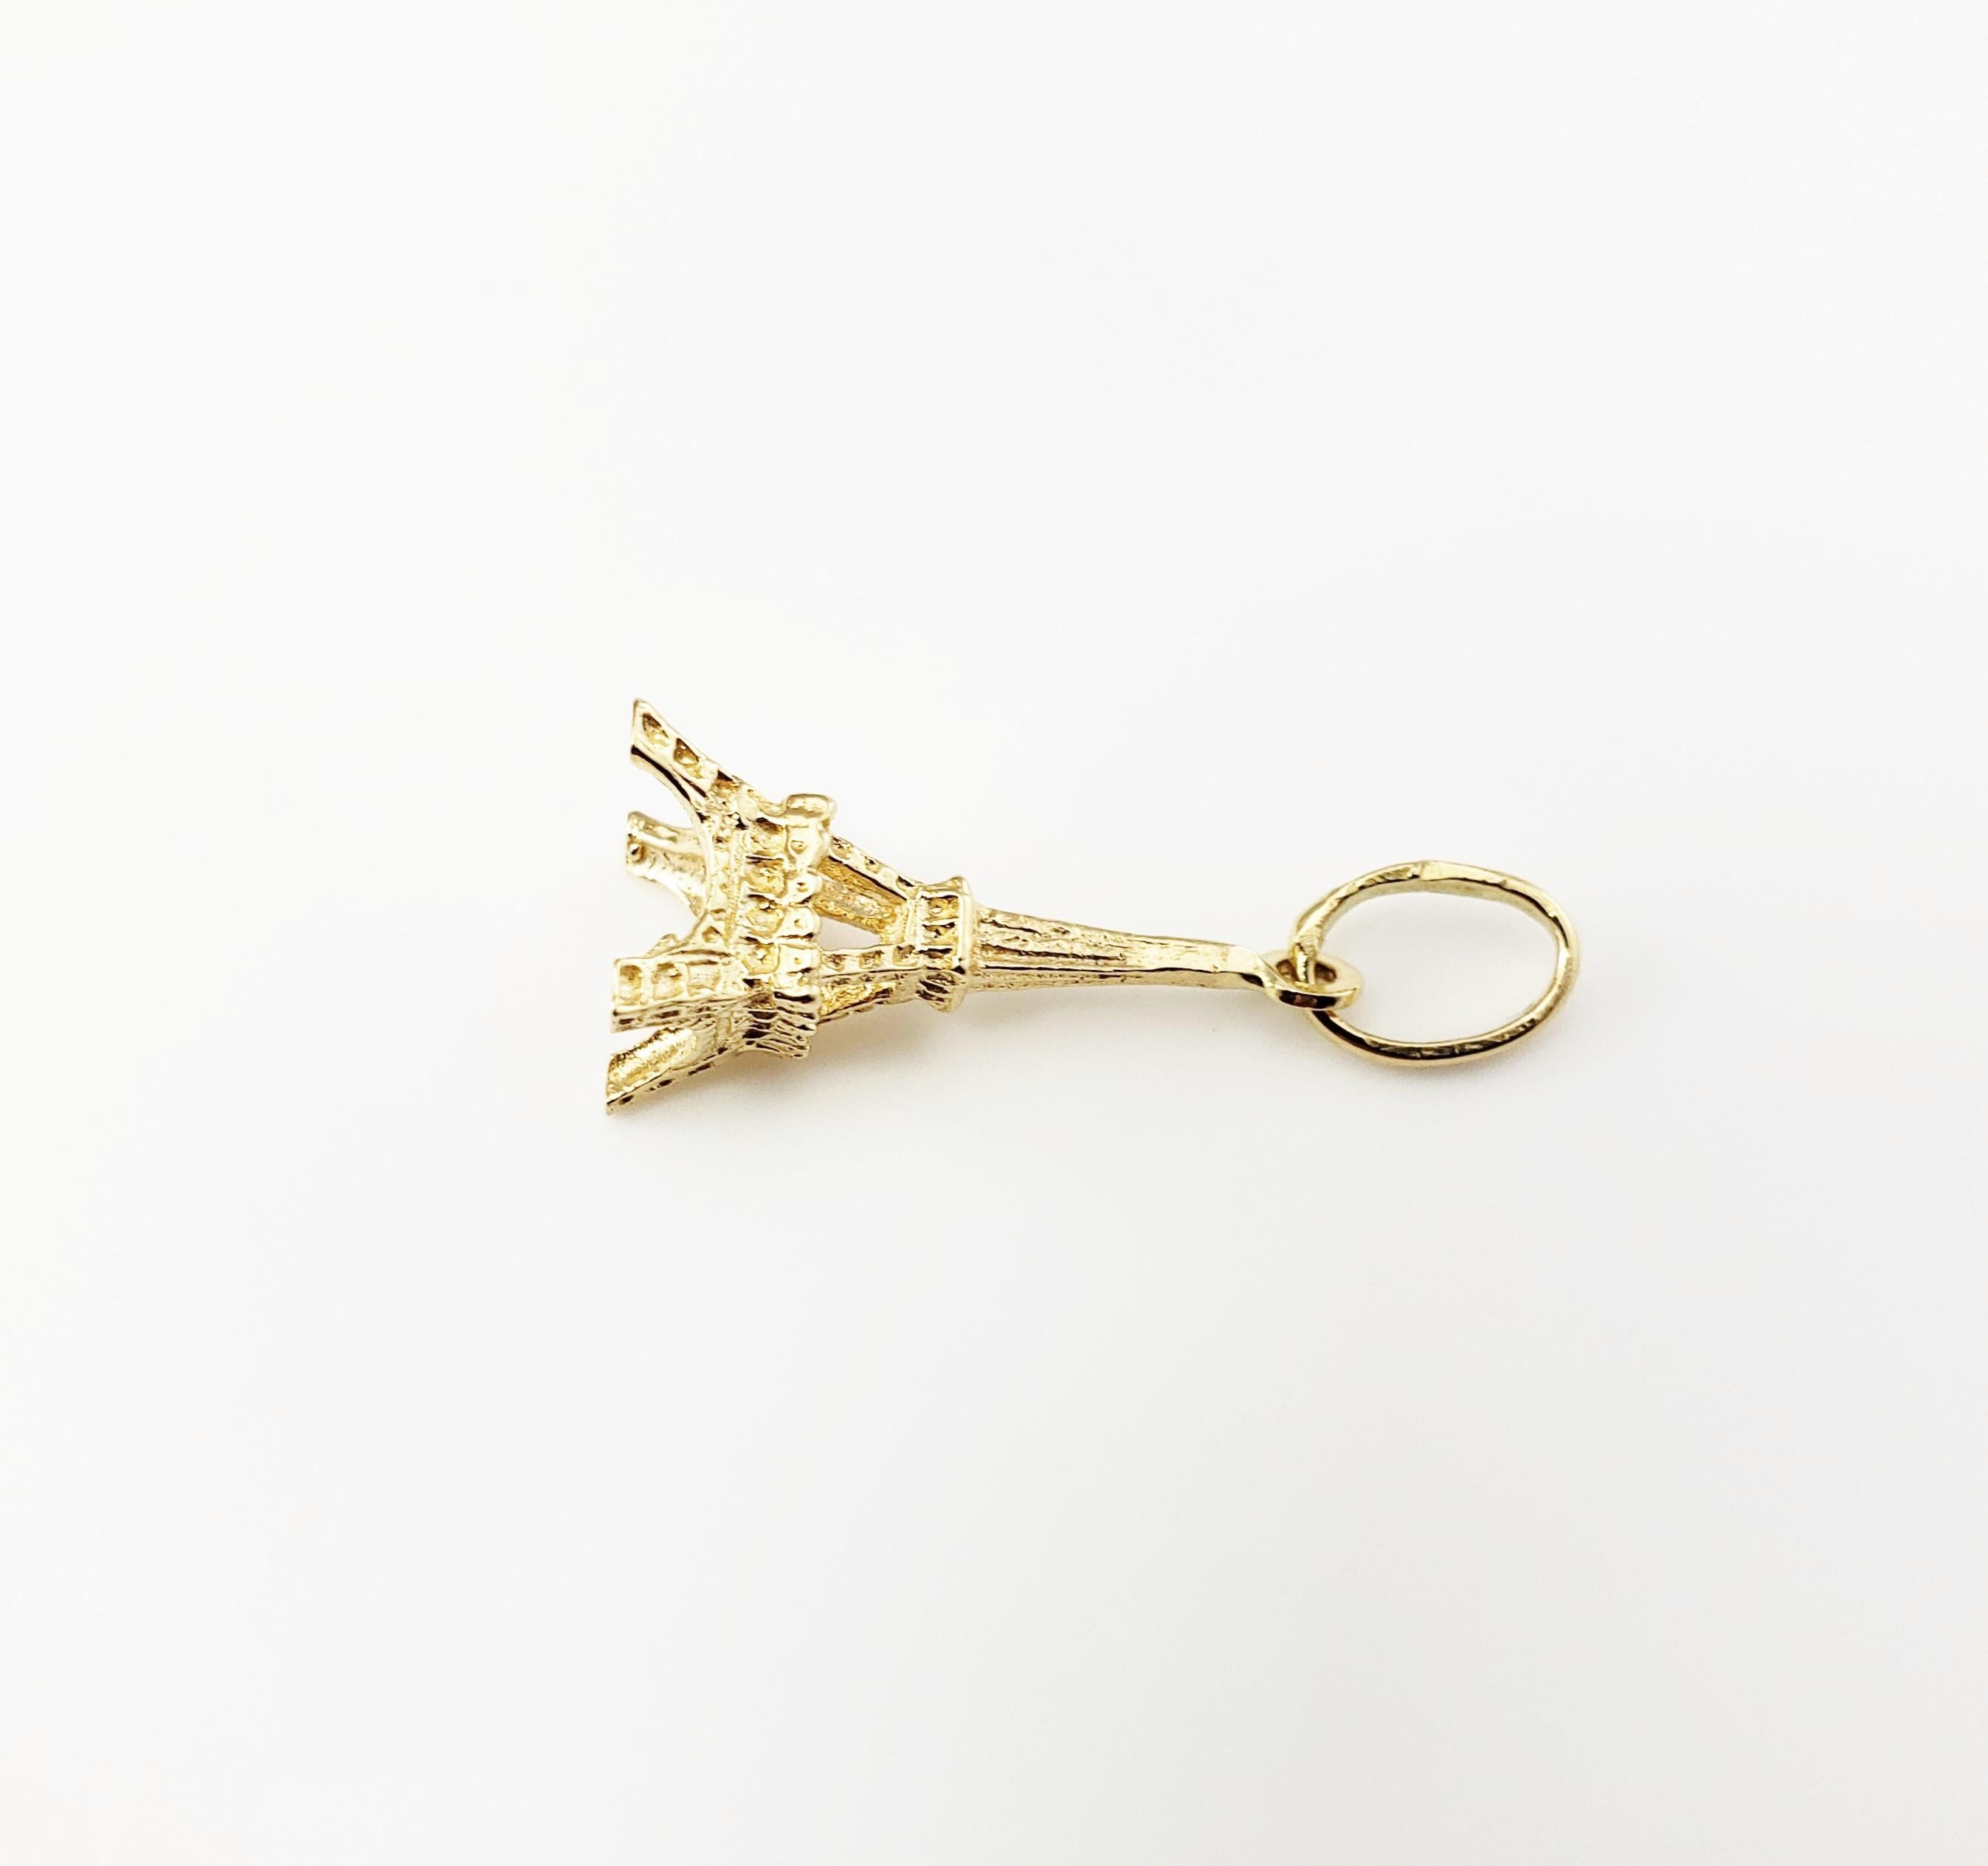 Vintage 18 Karat Yellow Gold Eiffel Tower Charm

The Eiffel Tower is one of the most enduring symbols of France!

This lovely 3D charm features the iconic Eiffel Tower meticulously detailed in 18K yellow gold.

Size: 21 mm x 9 mm (actual